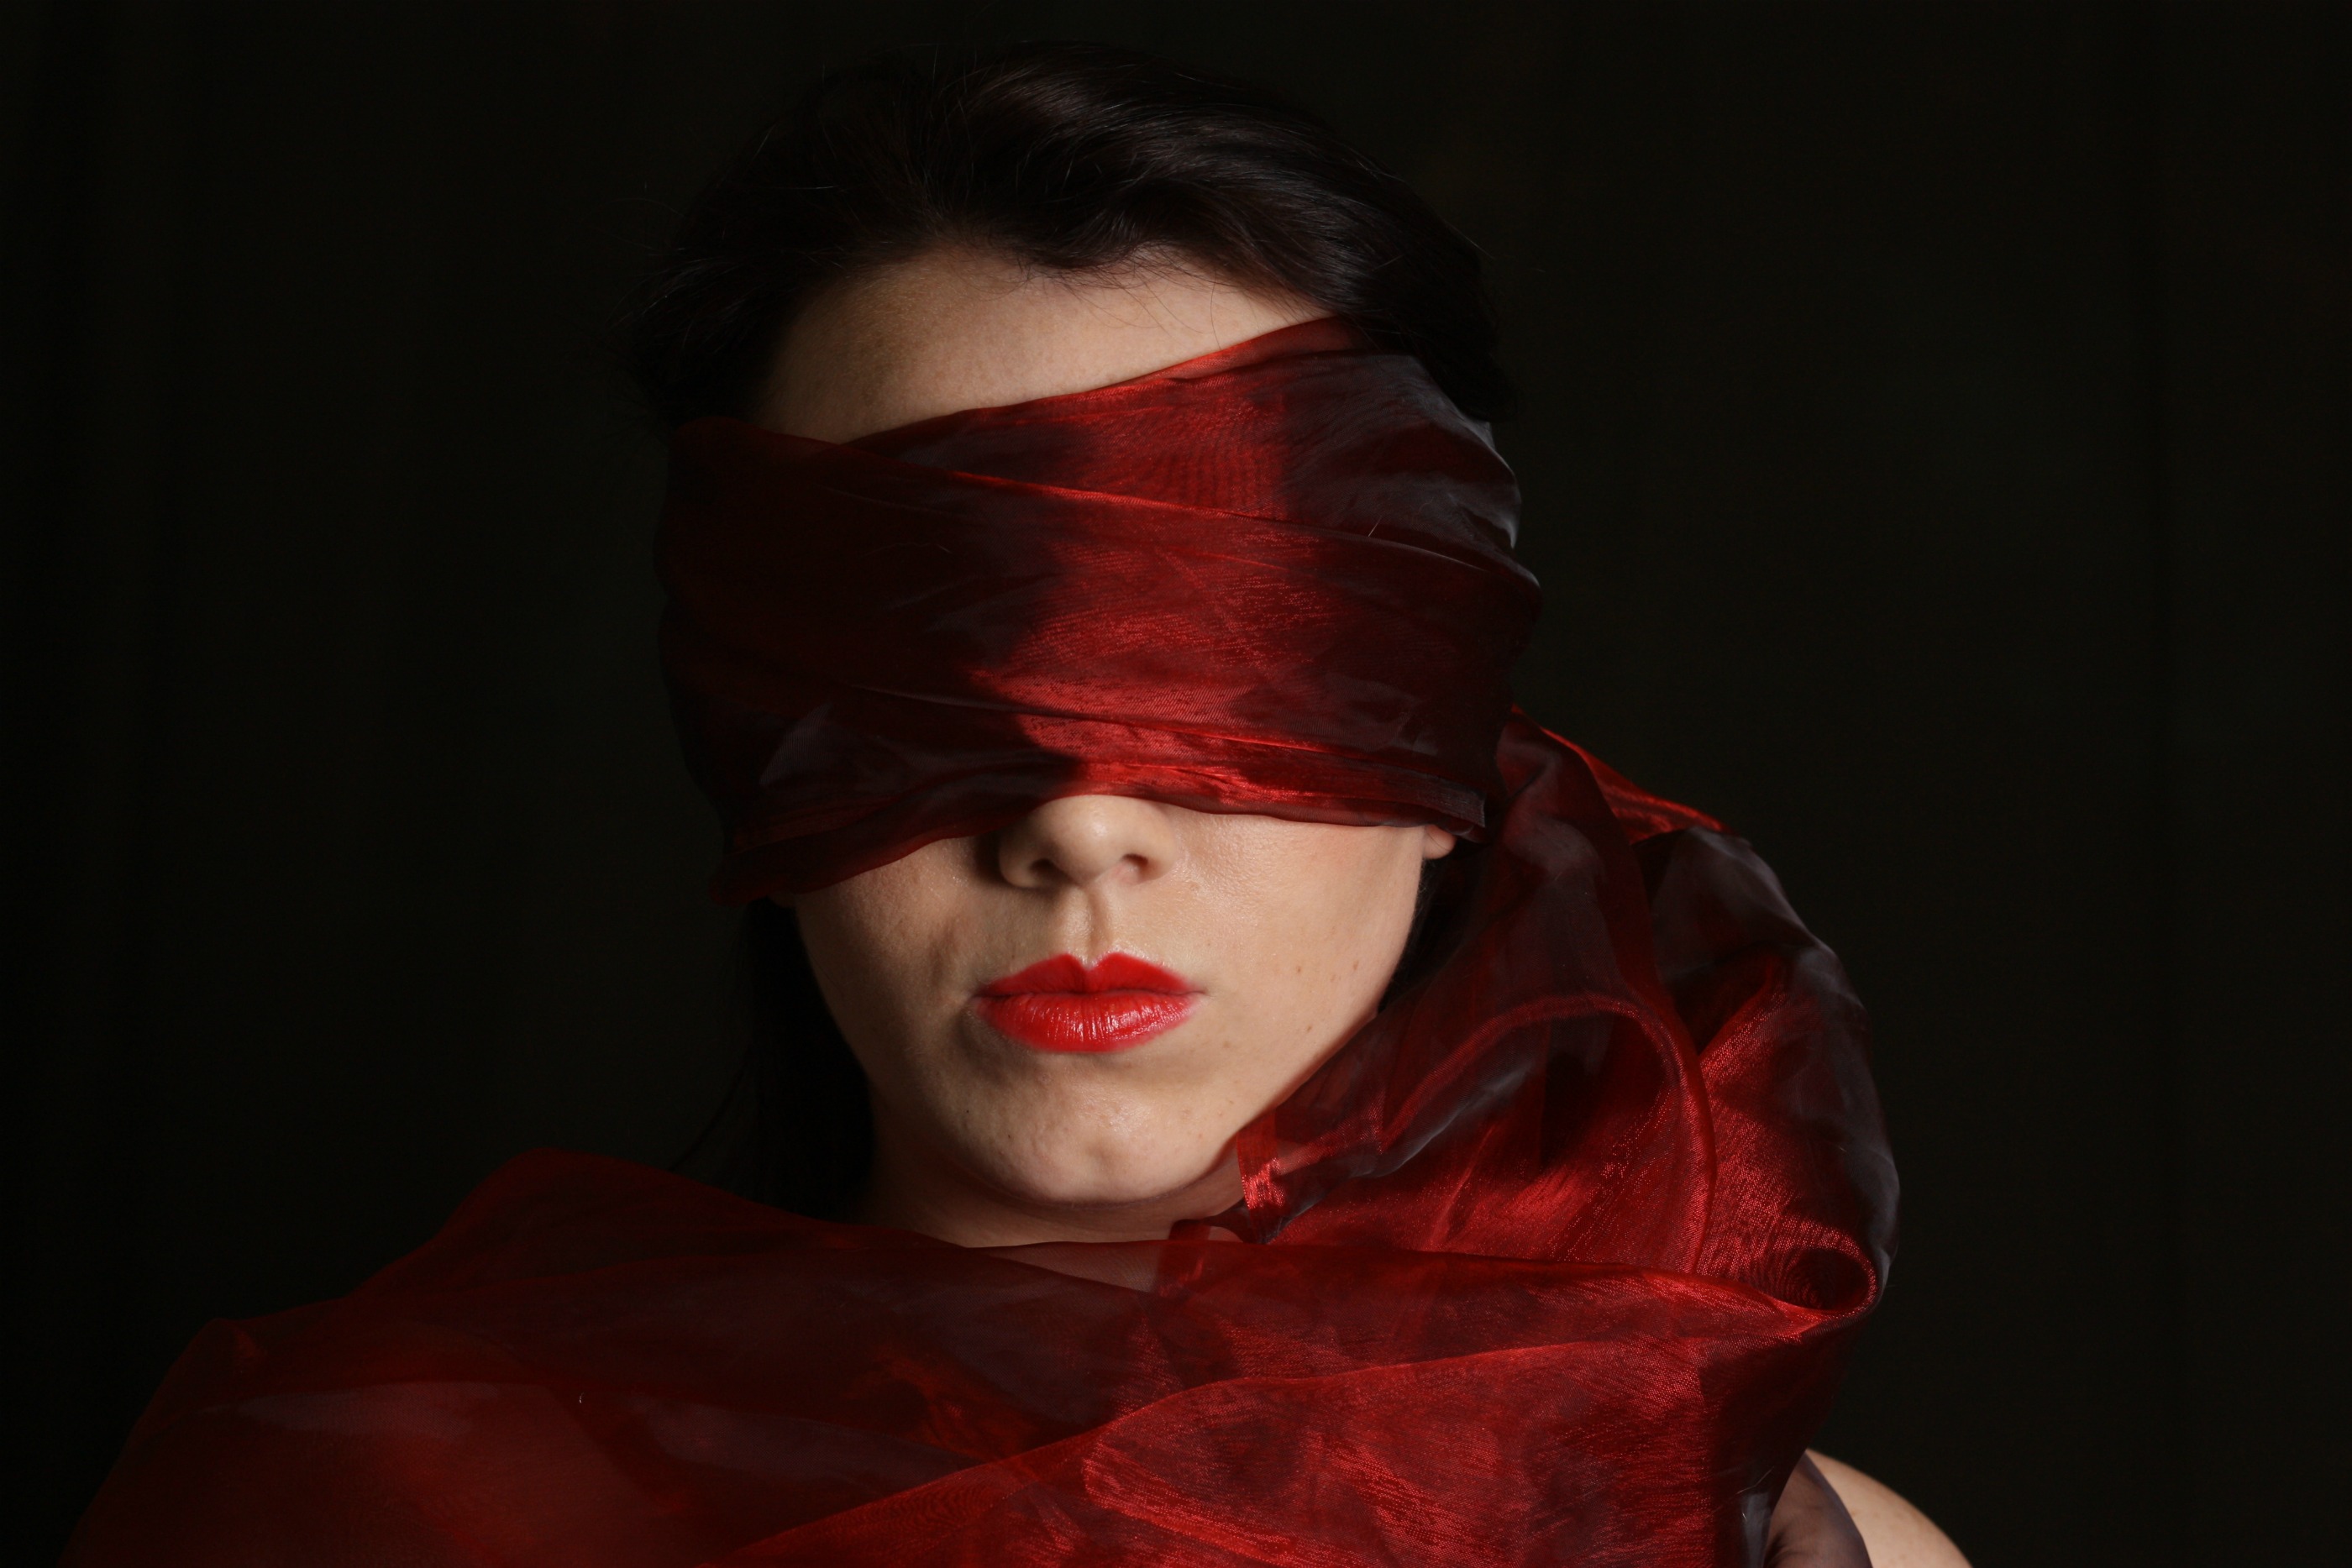 Red Blindfolded Woman Gallery Wrap